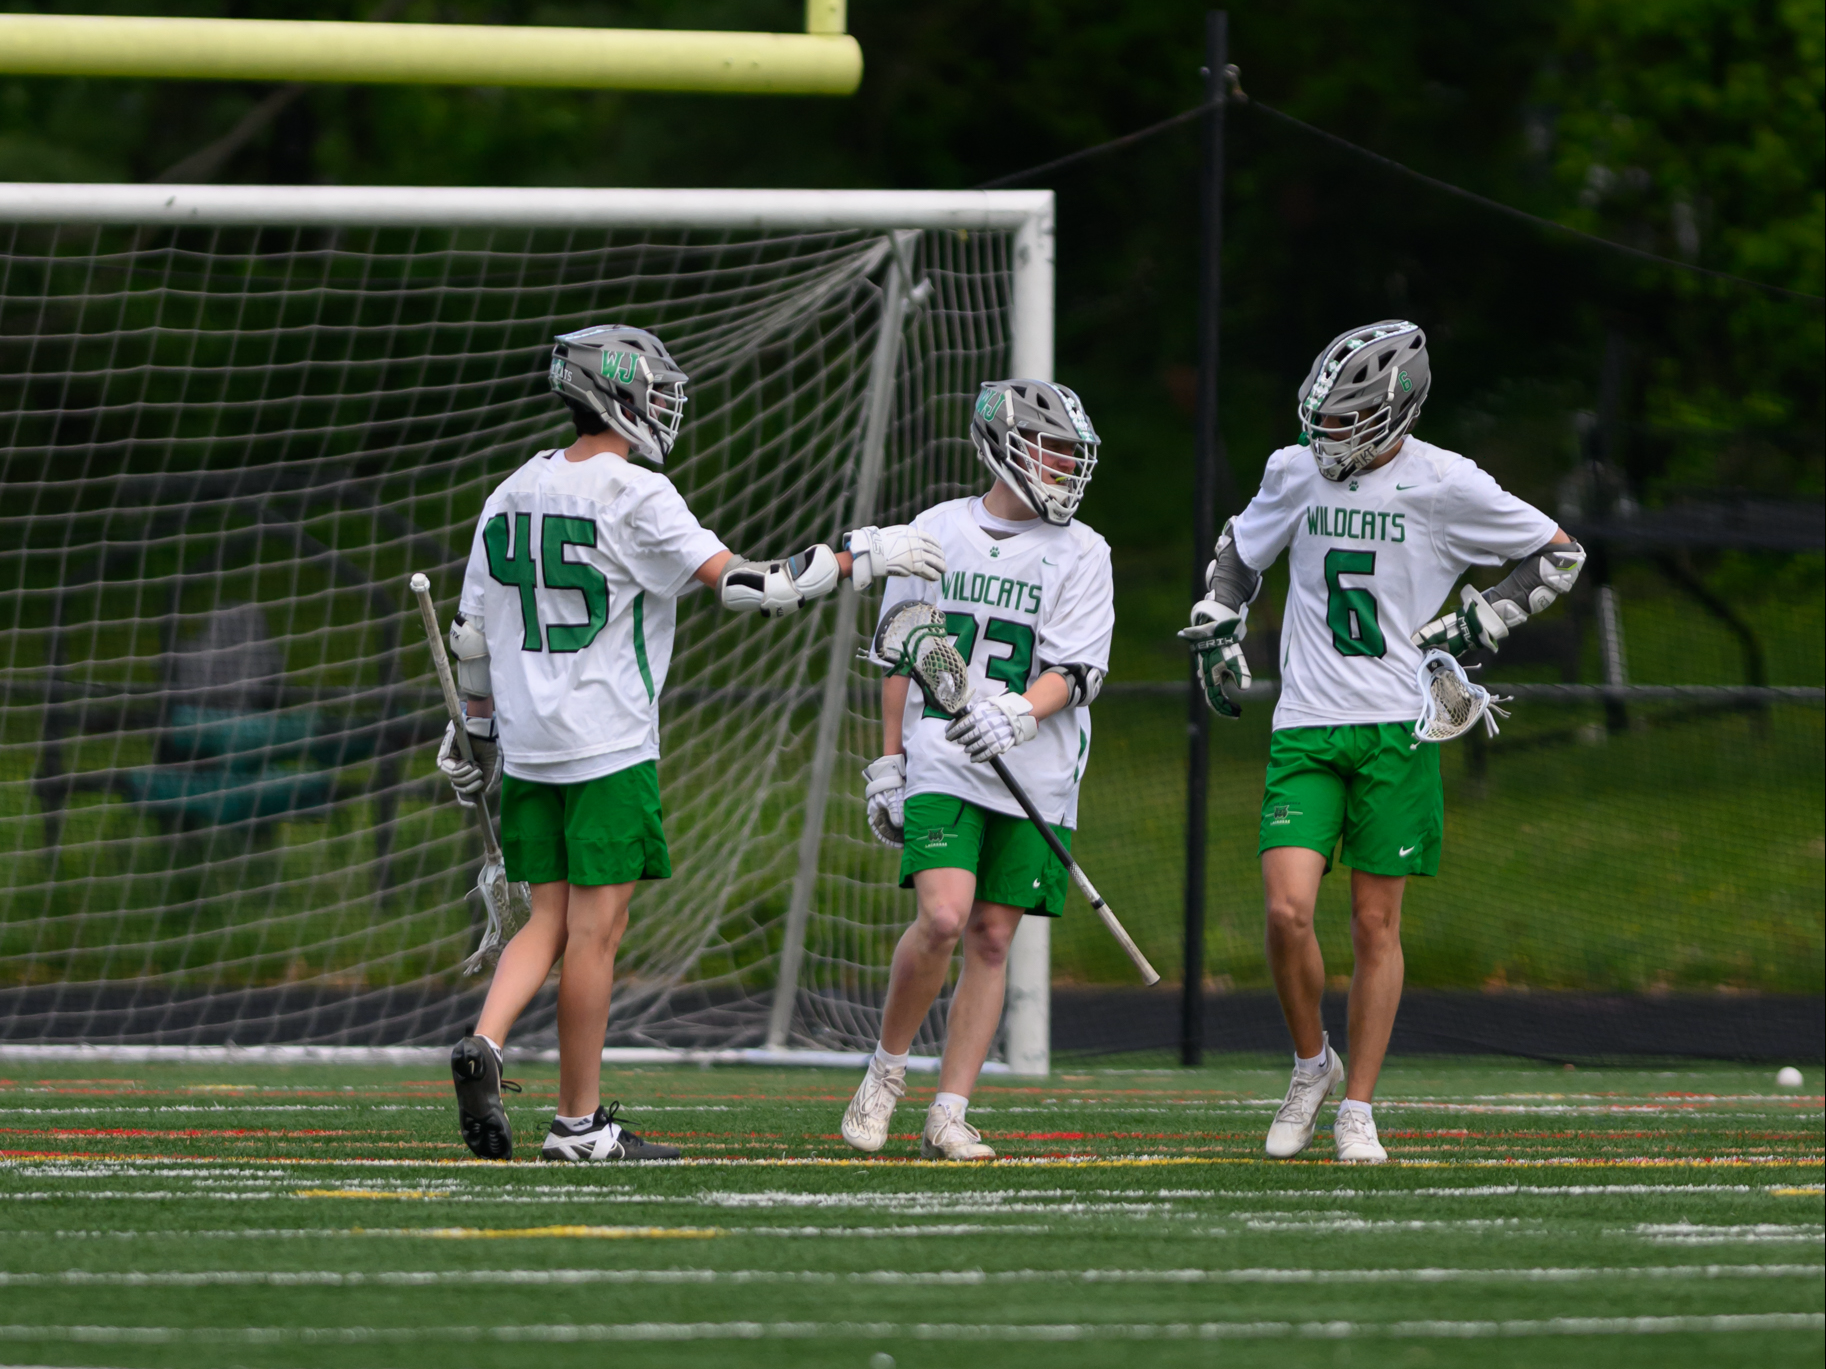 The attacking trio consisting of seniors Jonah Levy and Noah Diamond along with junior Ryan Gardner, celebrate after a WJ goal. (Courtesy Kevin Choi via Lifetouch)